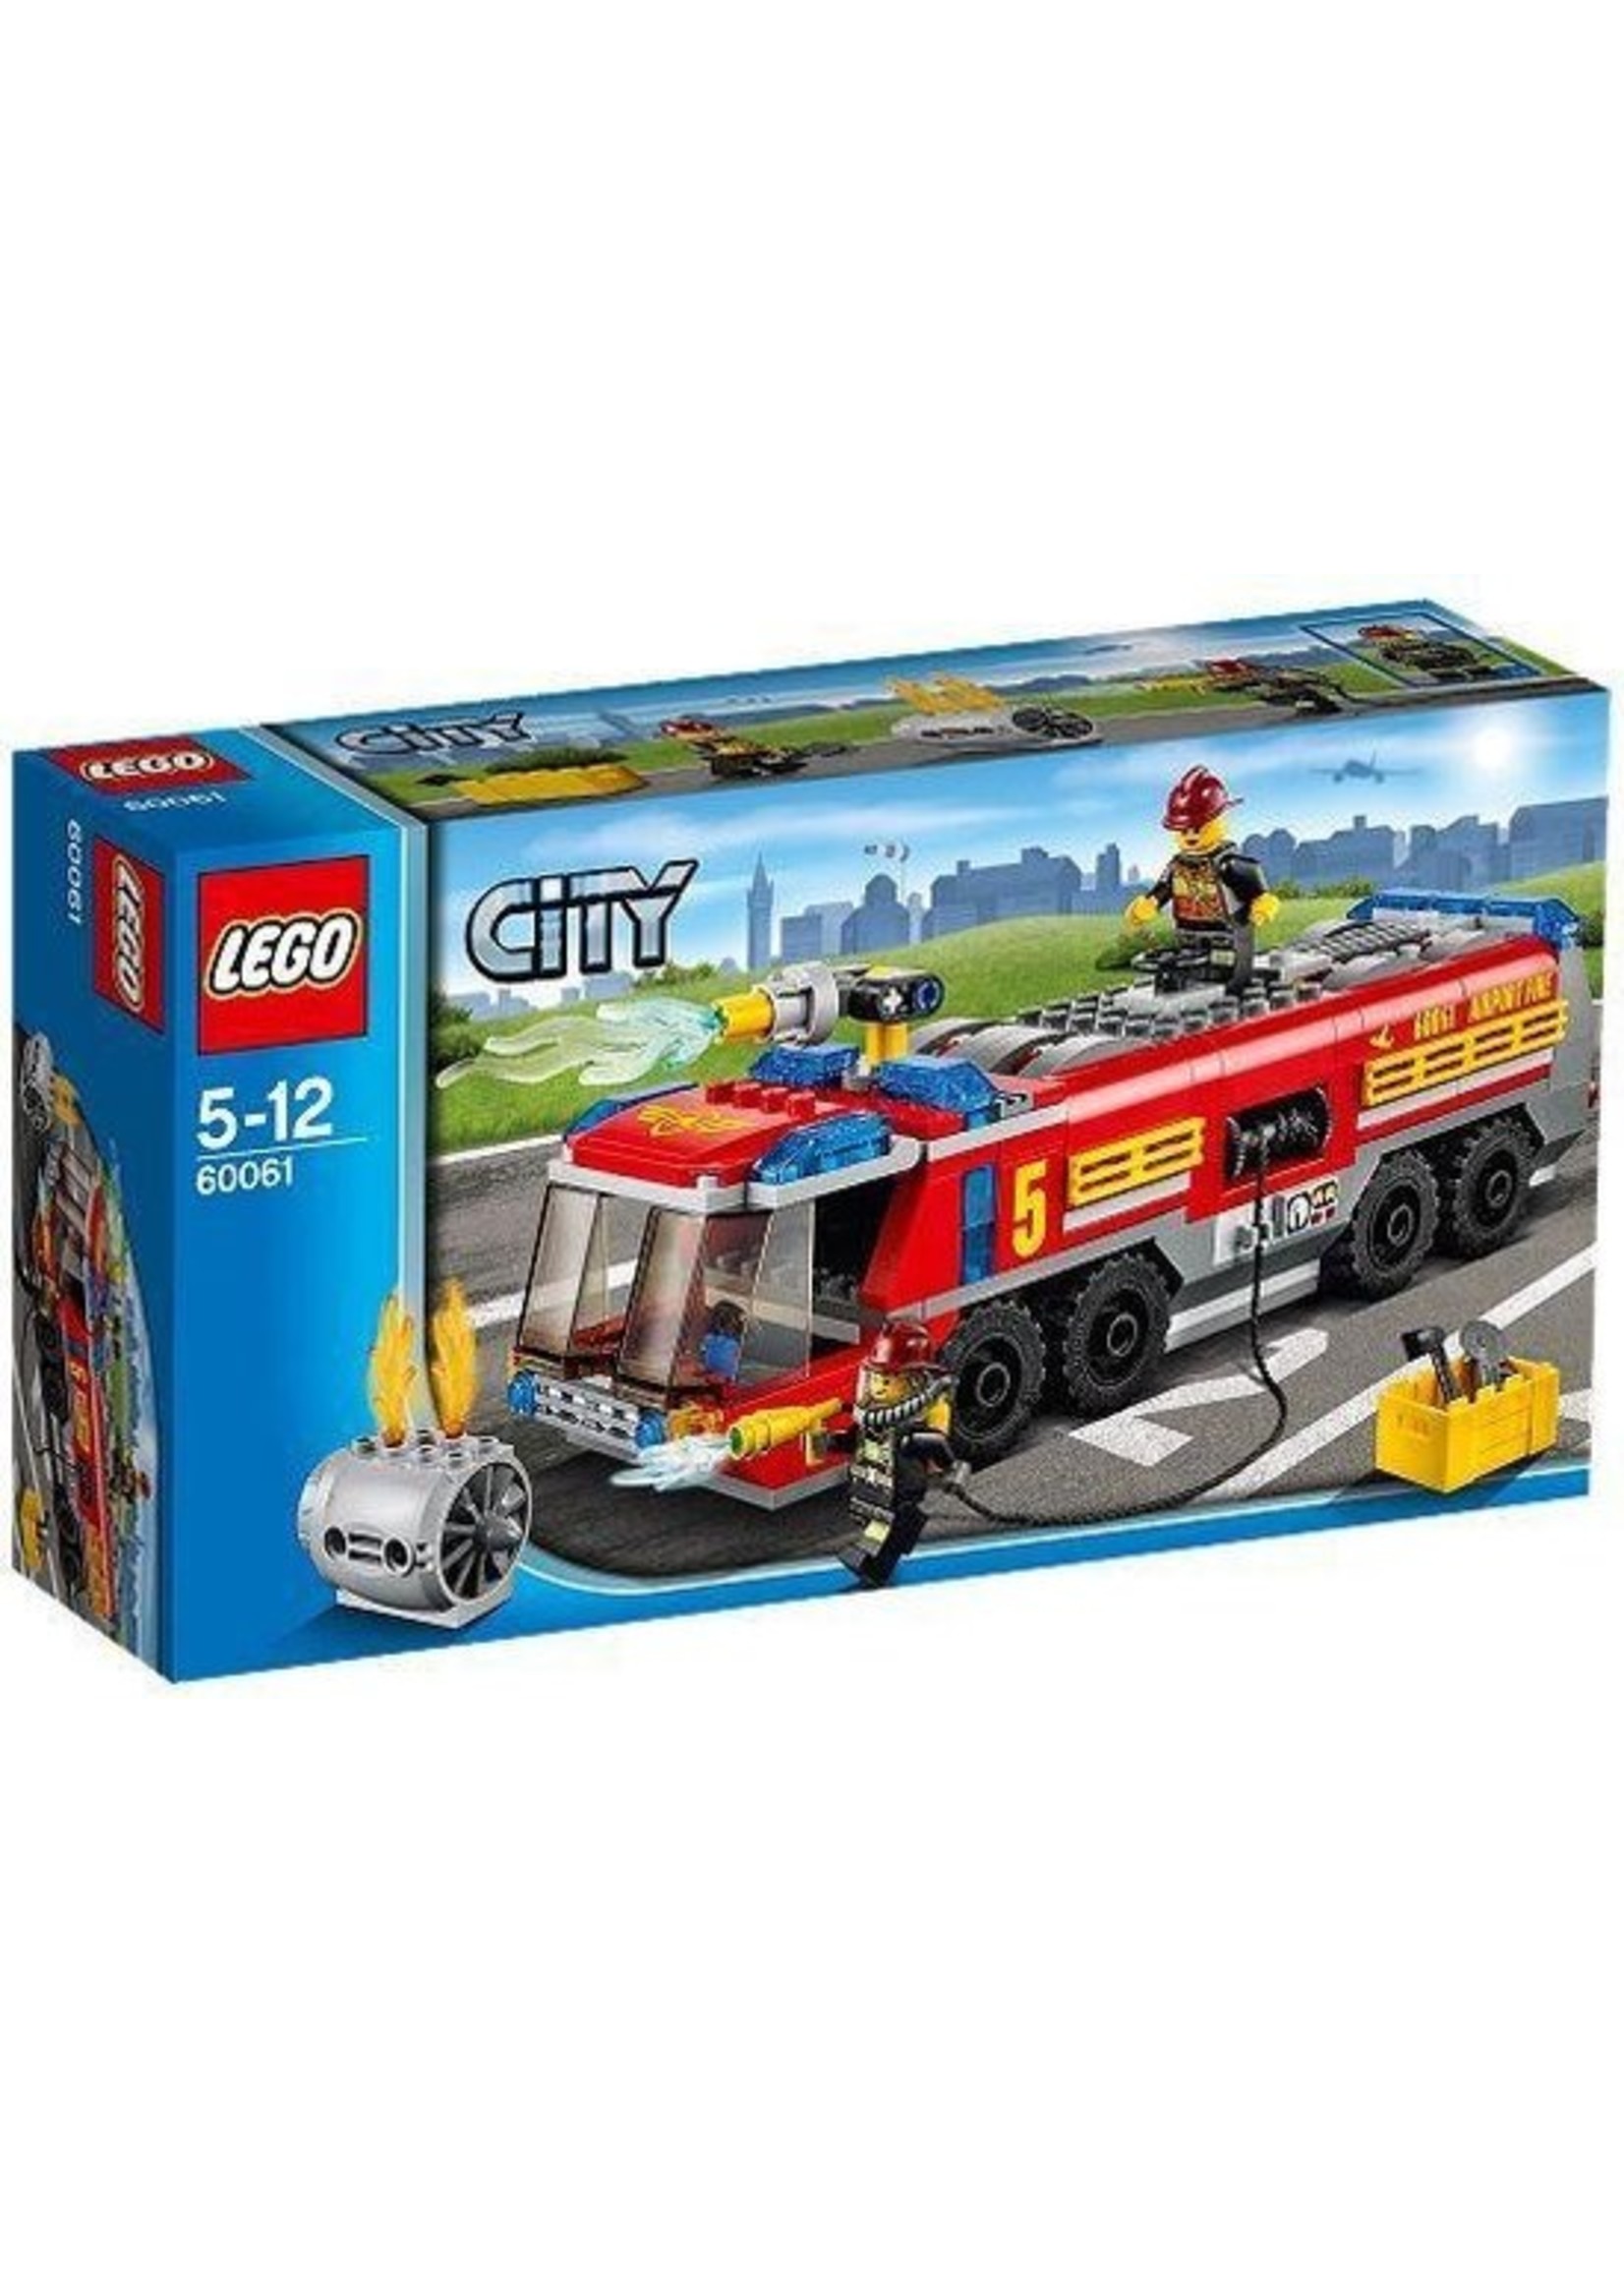 LEGO City Airport Fire Truck - 60061